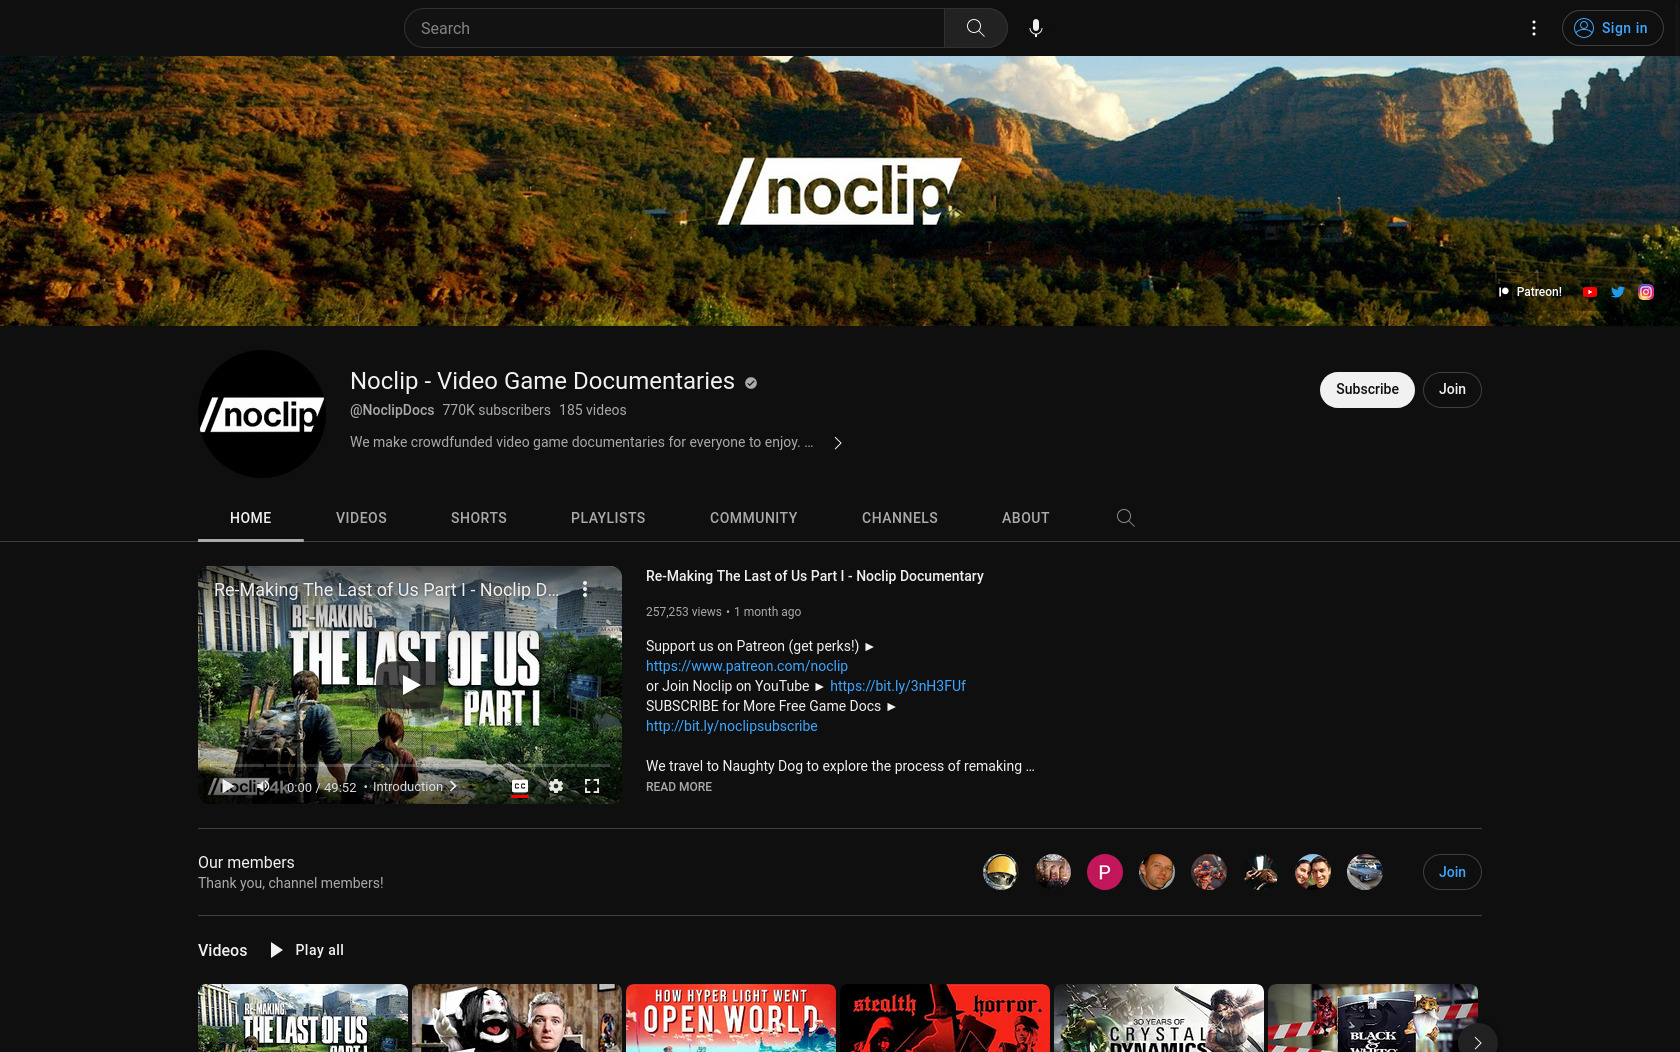 Screenshot of the Noclip YouTube channel